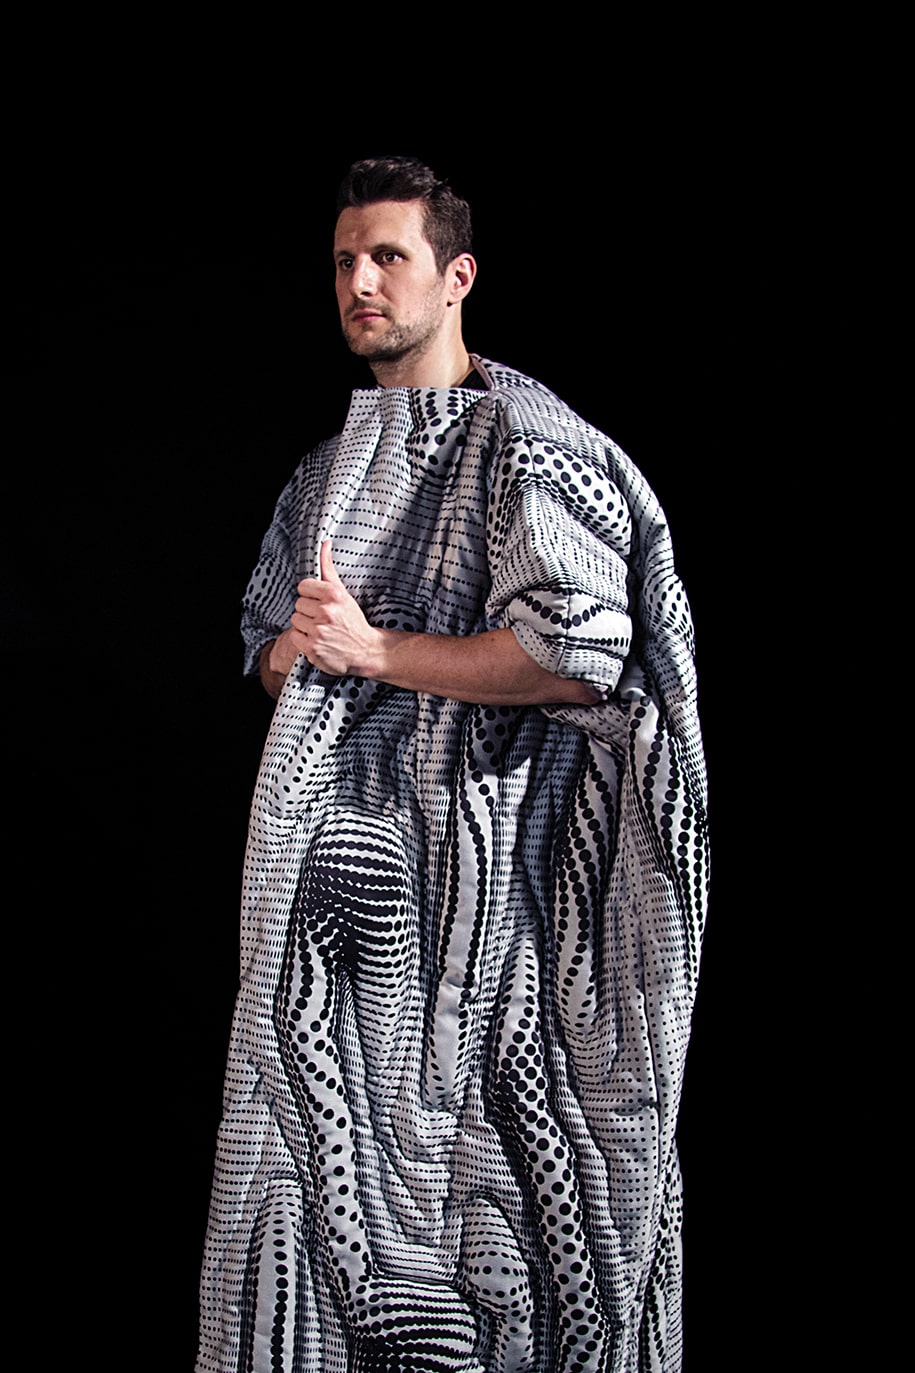 Archisearch CHBL Jammer Coat by COOP HIMMELB(L)AU enables its user to digitally disappear